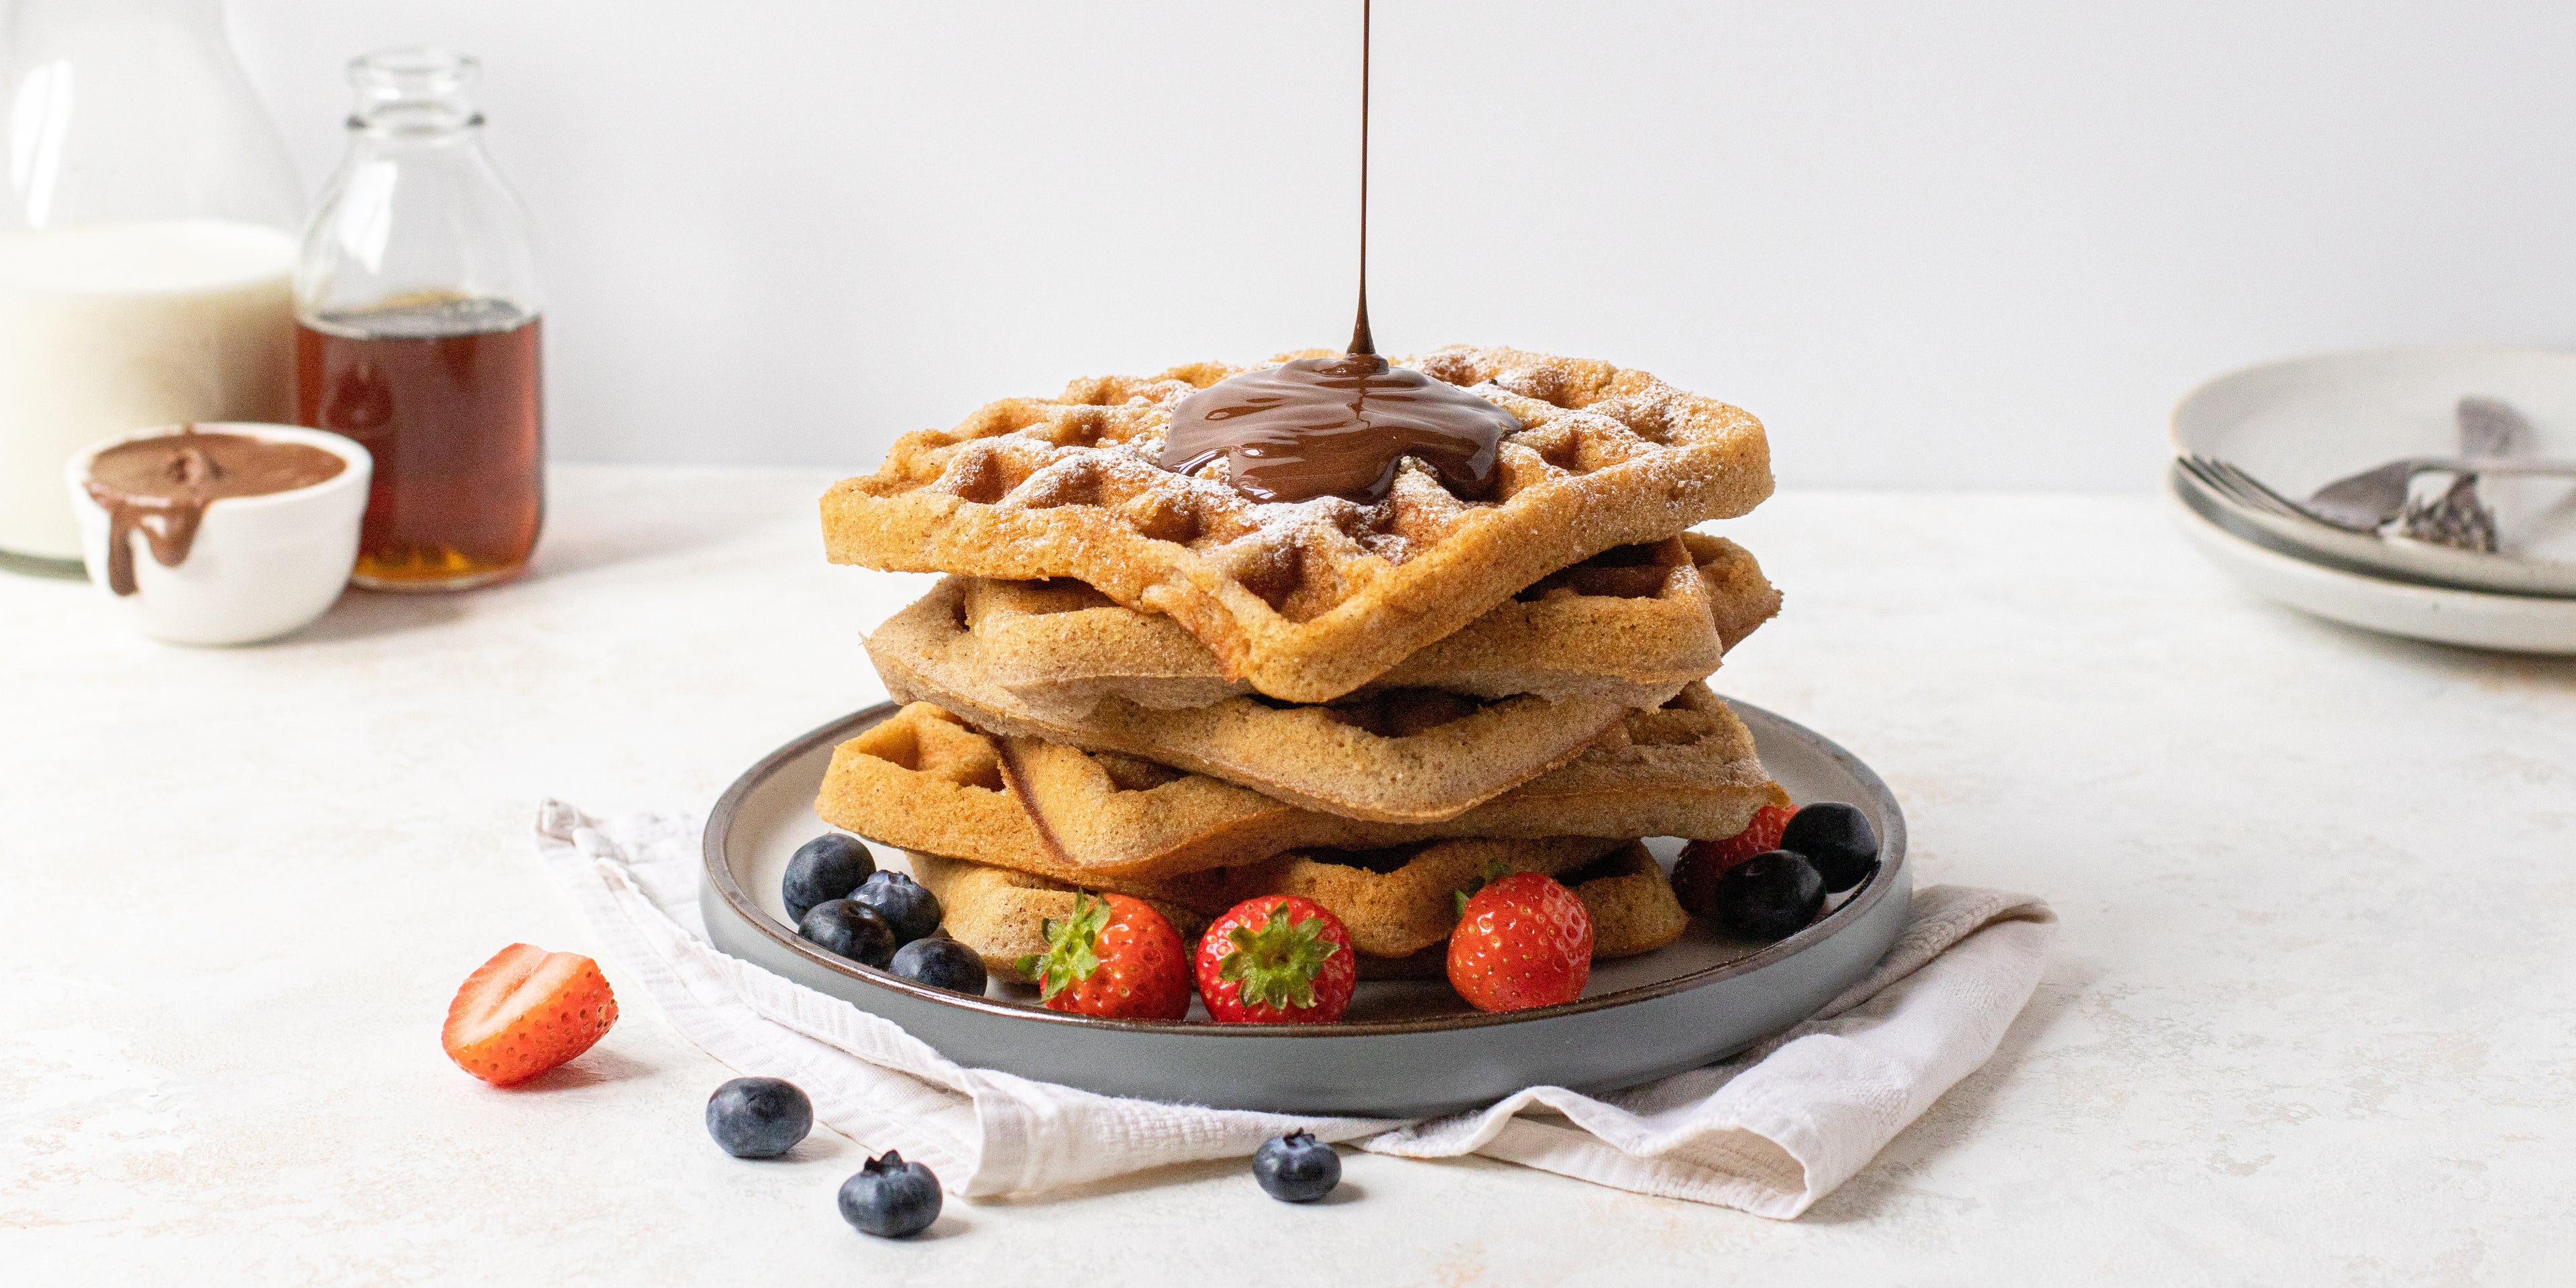 Stack of waffles being drizzled in chocolate sauce, topped with fresh berries